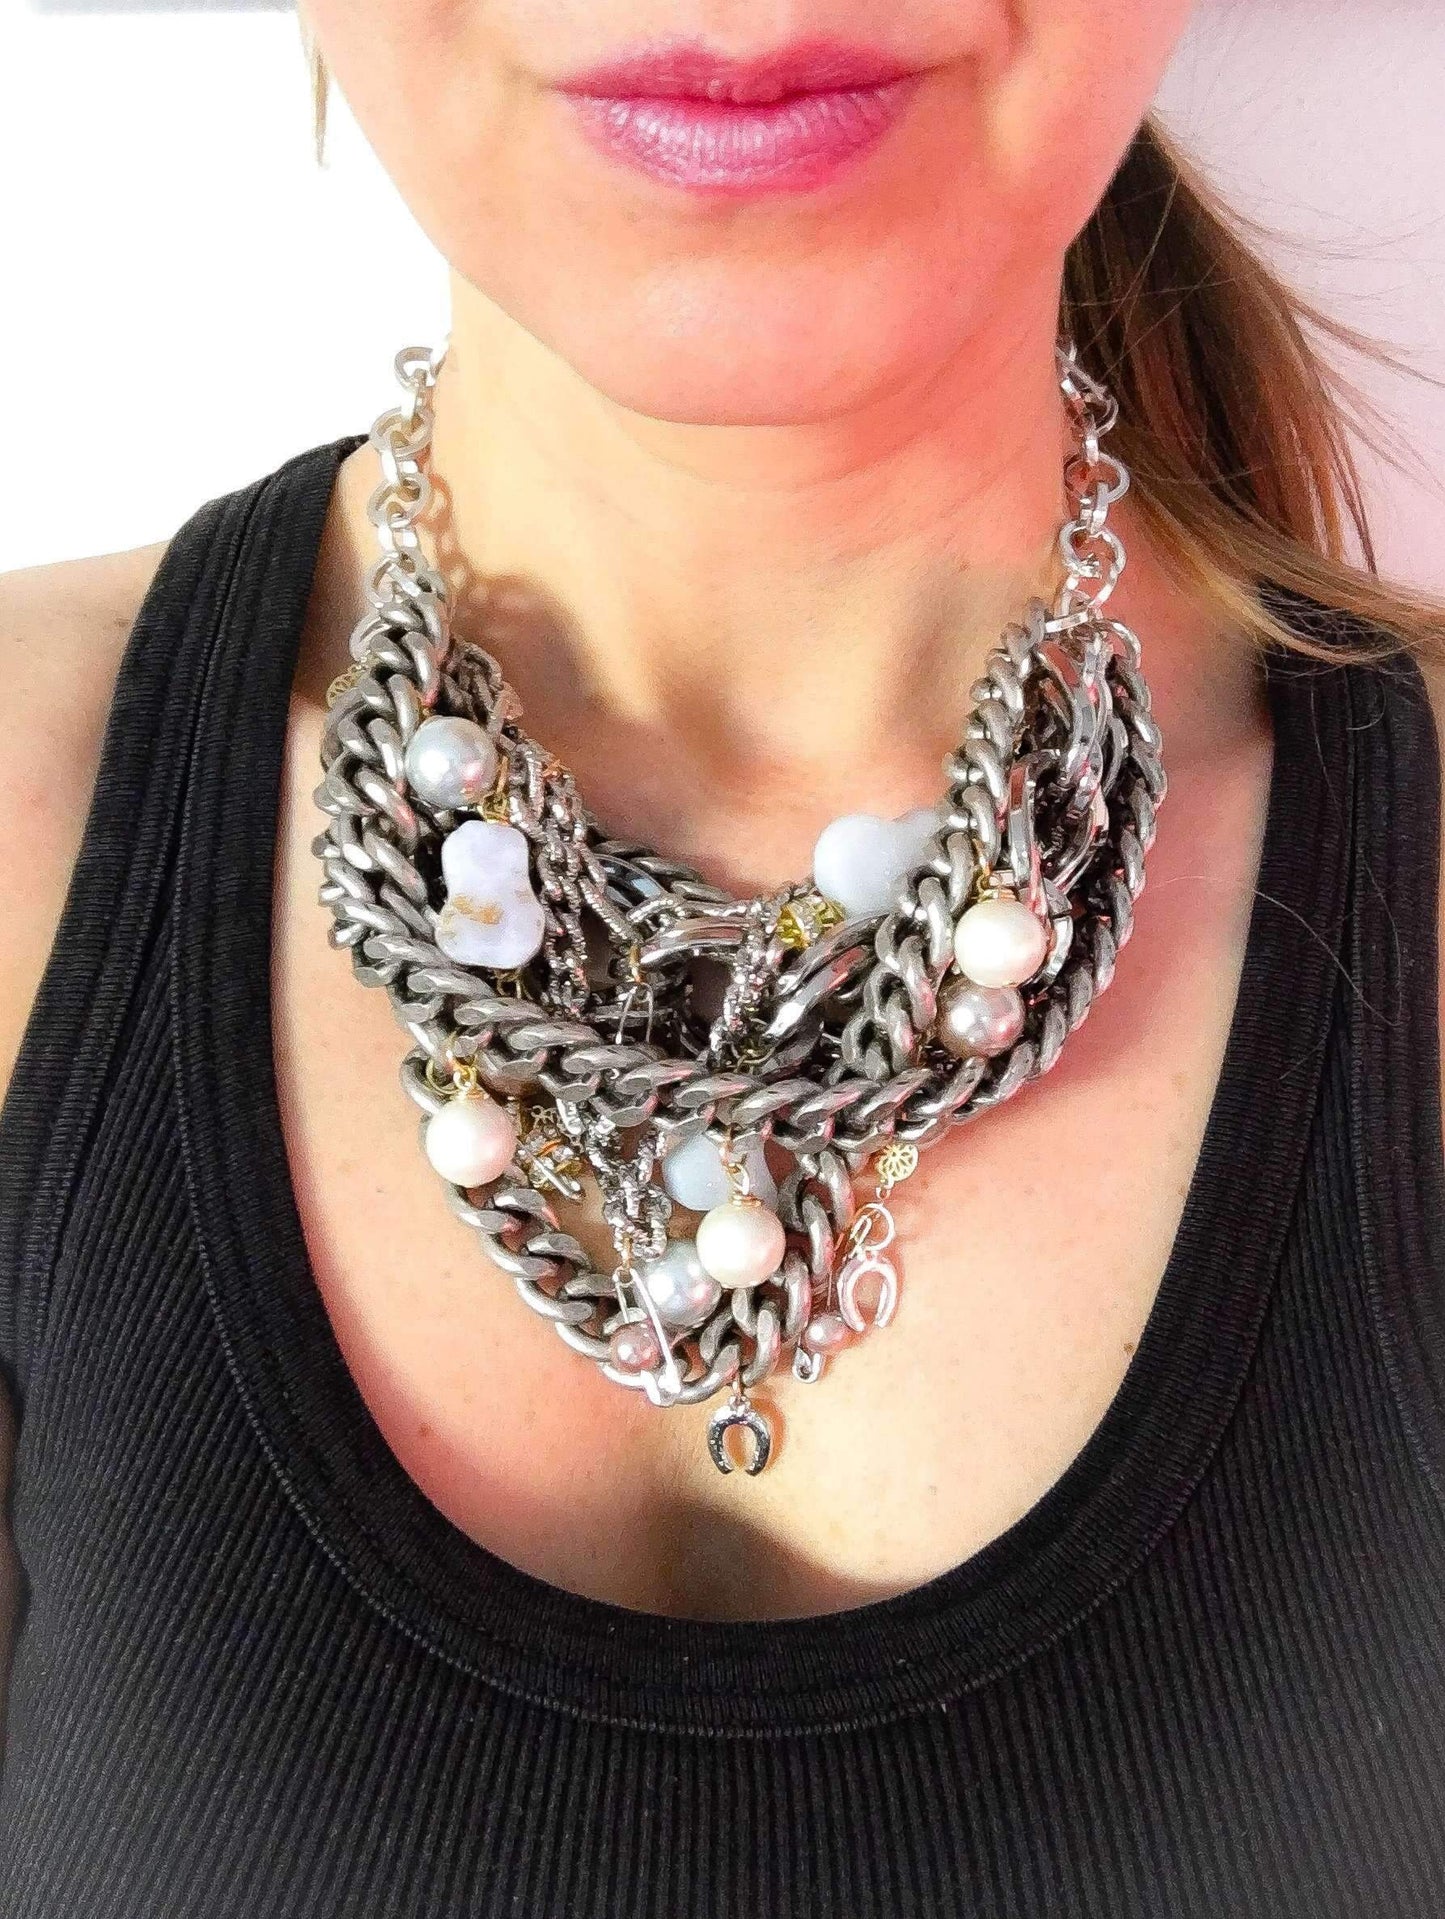 Silver statement necklace with calcedony, pearls and charms. Perfect